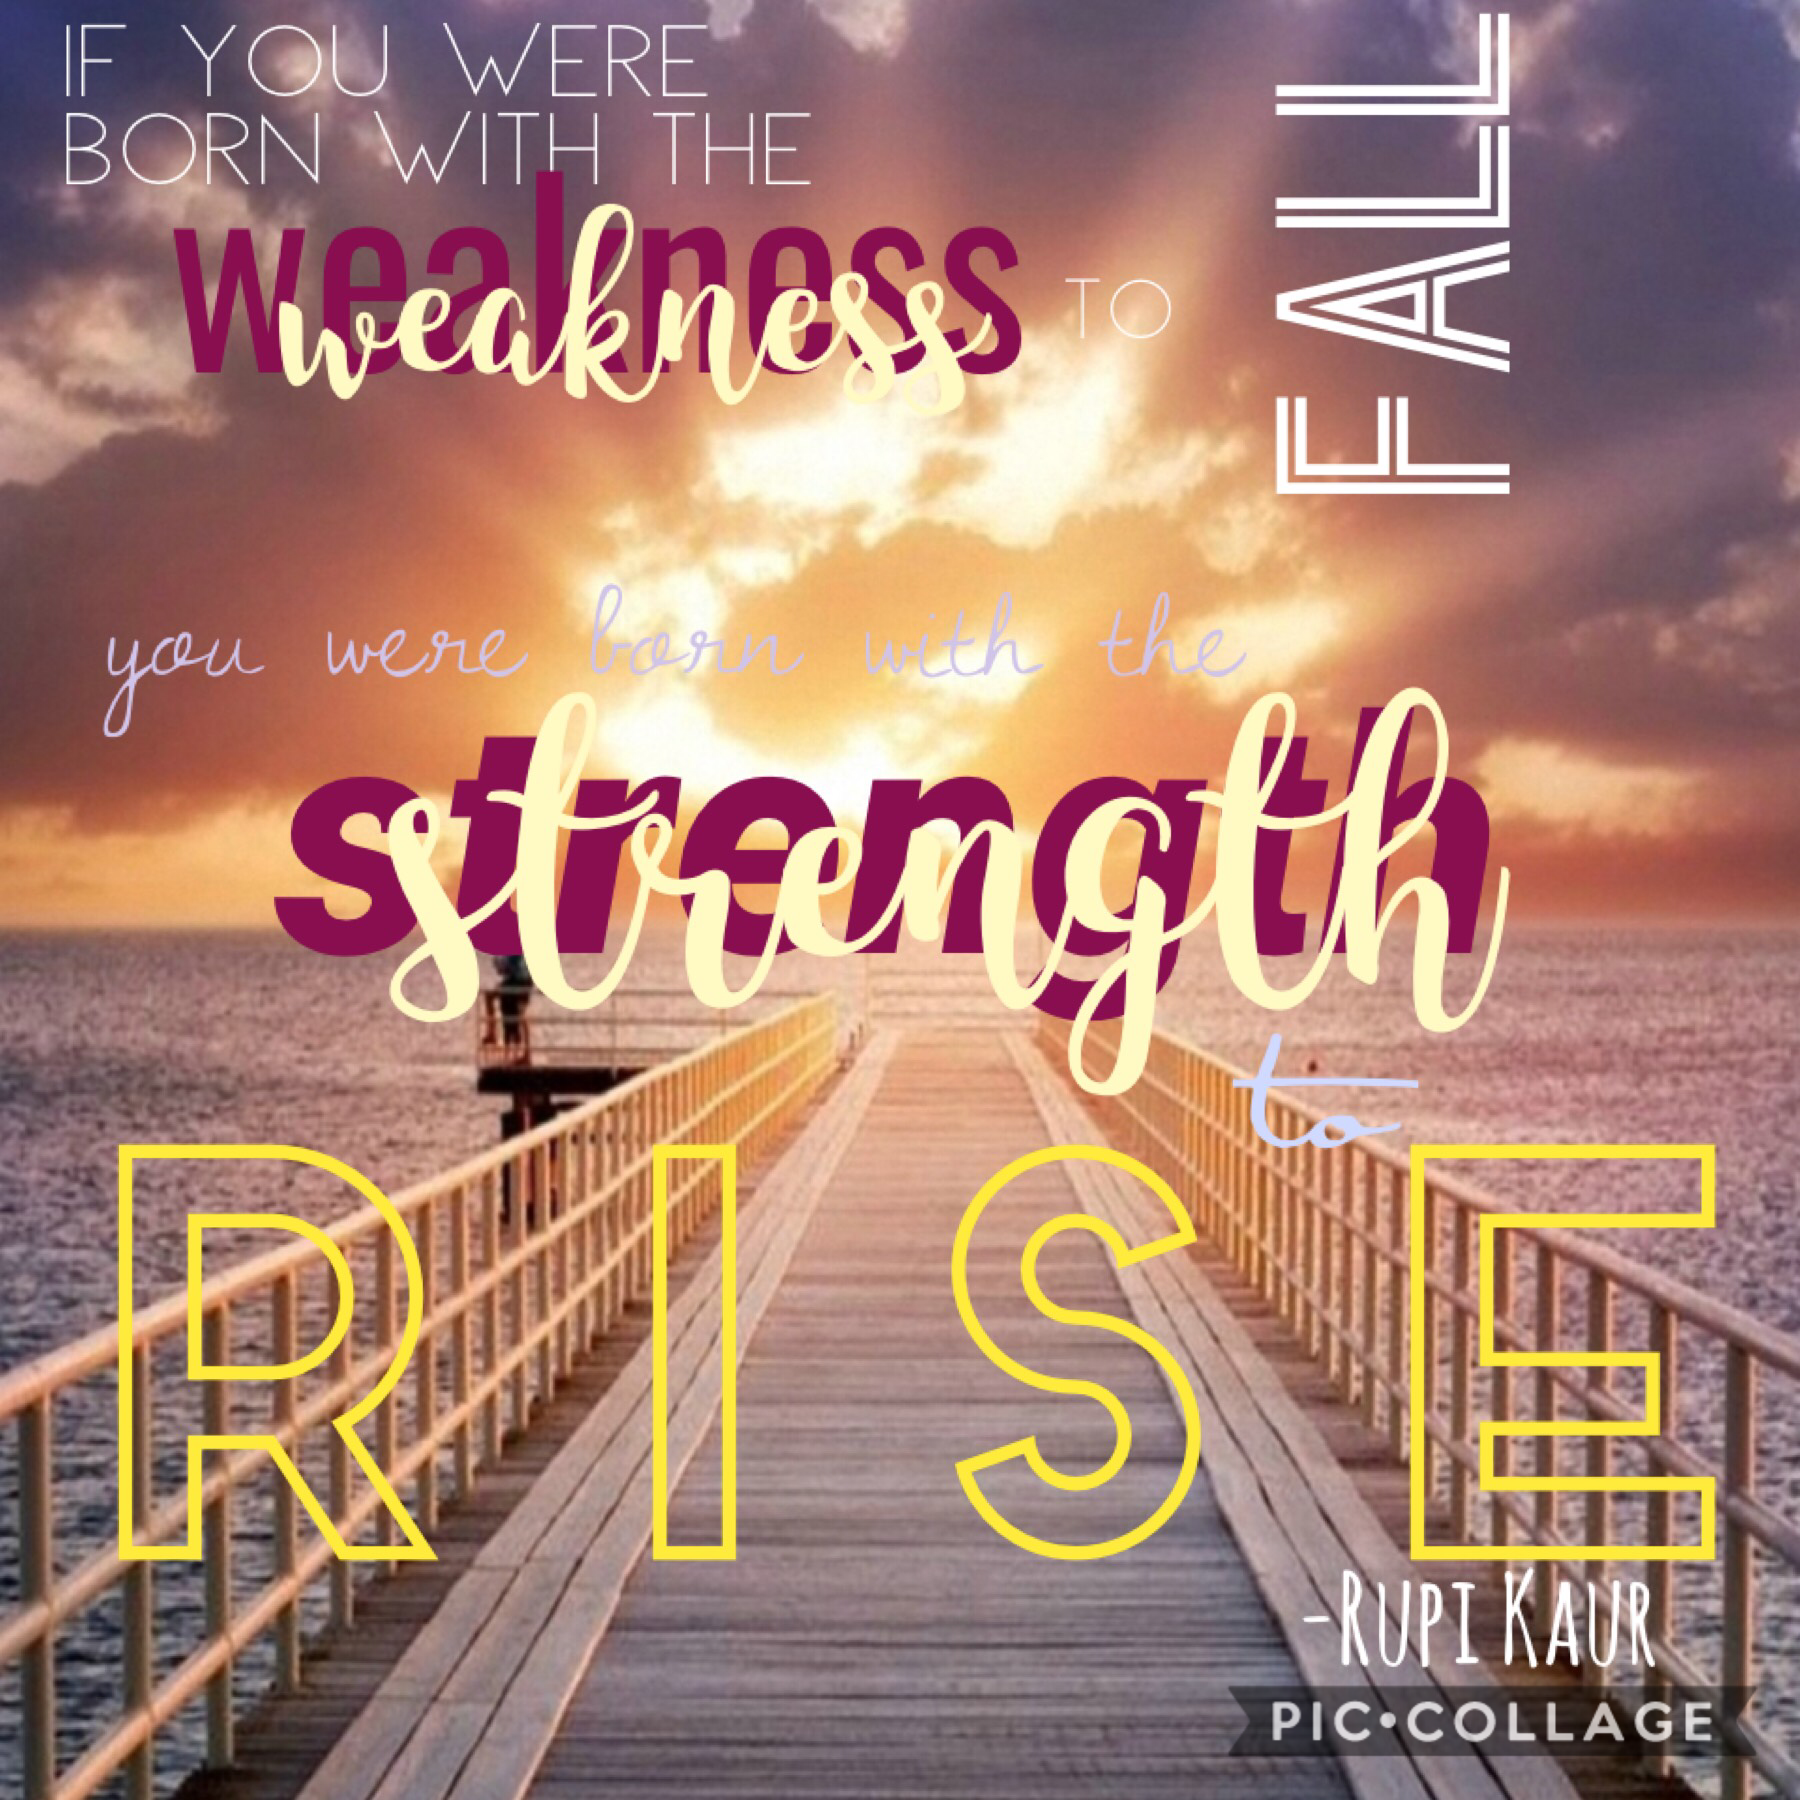 God gives us the strength to rise!☀️